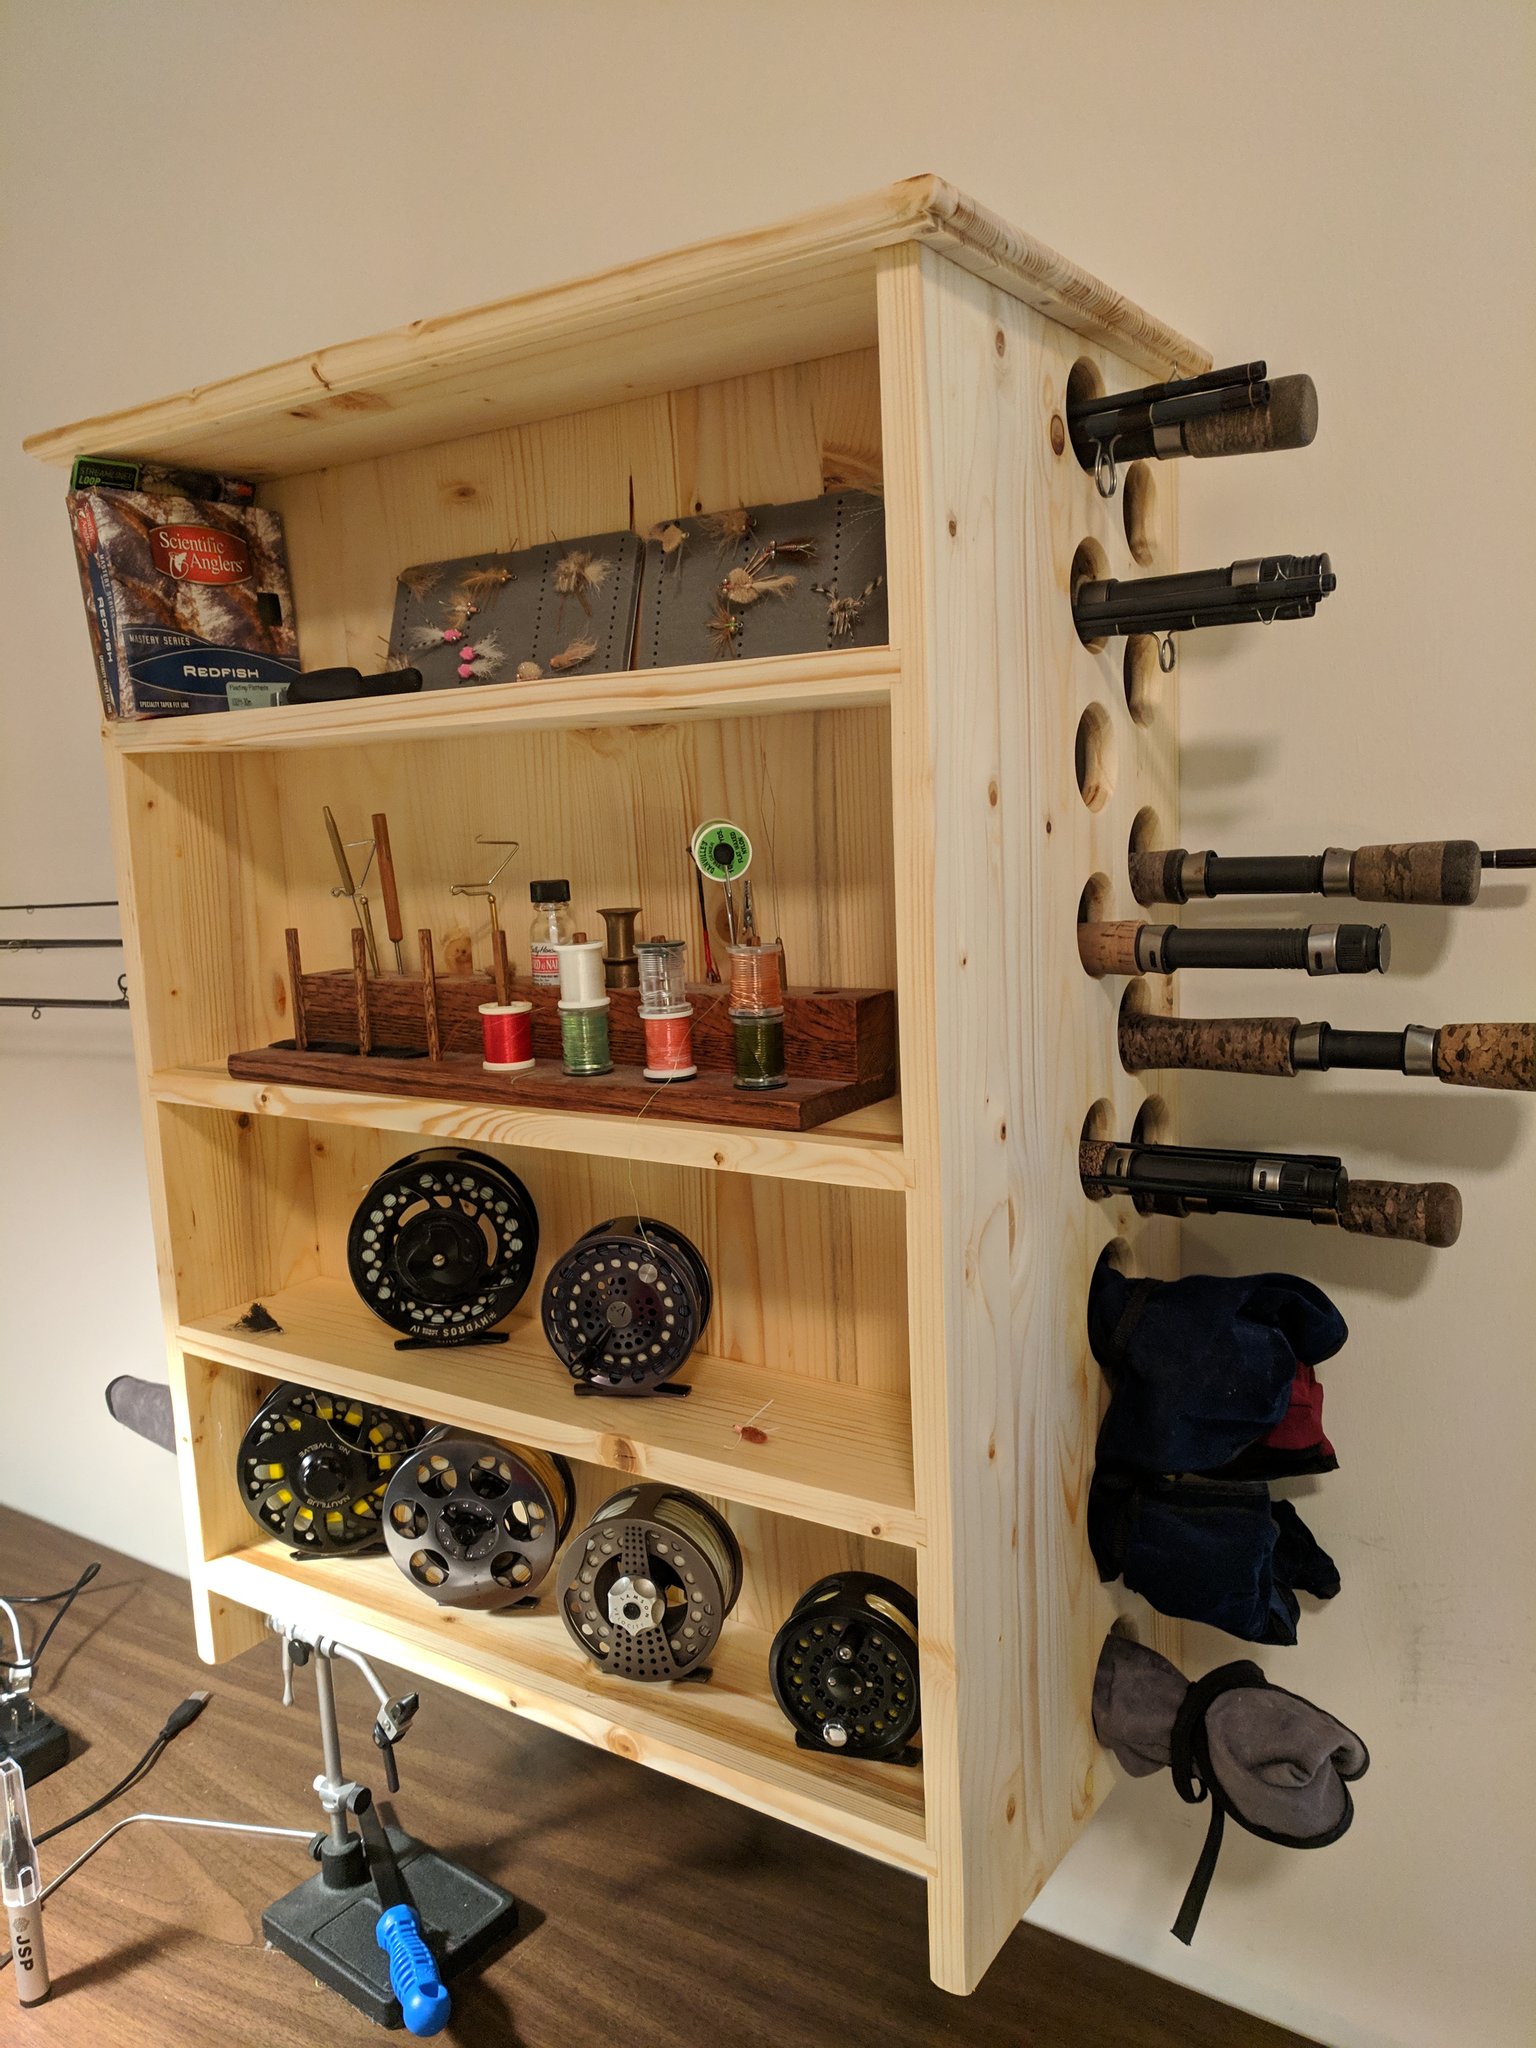 Barton Isaac on X: Put this fly rod cabinet together recently